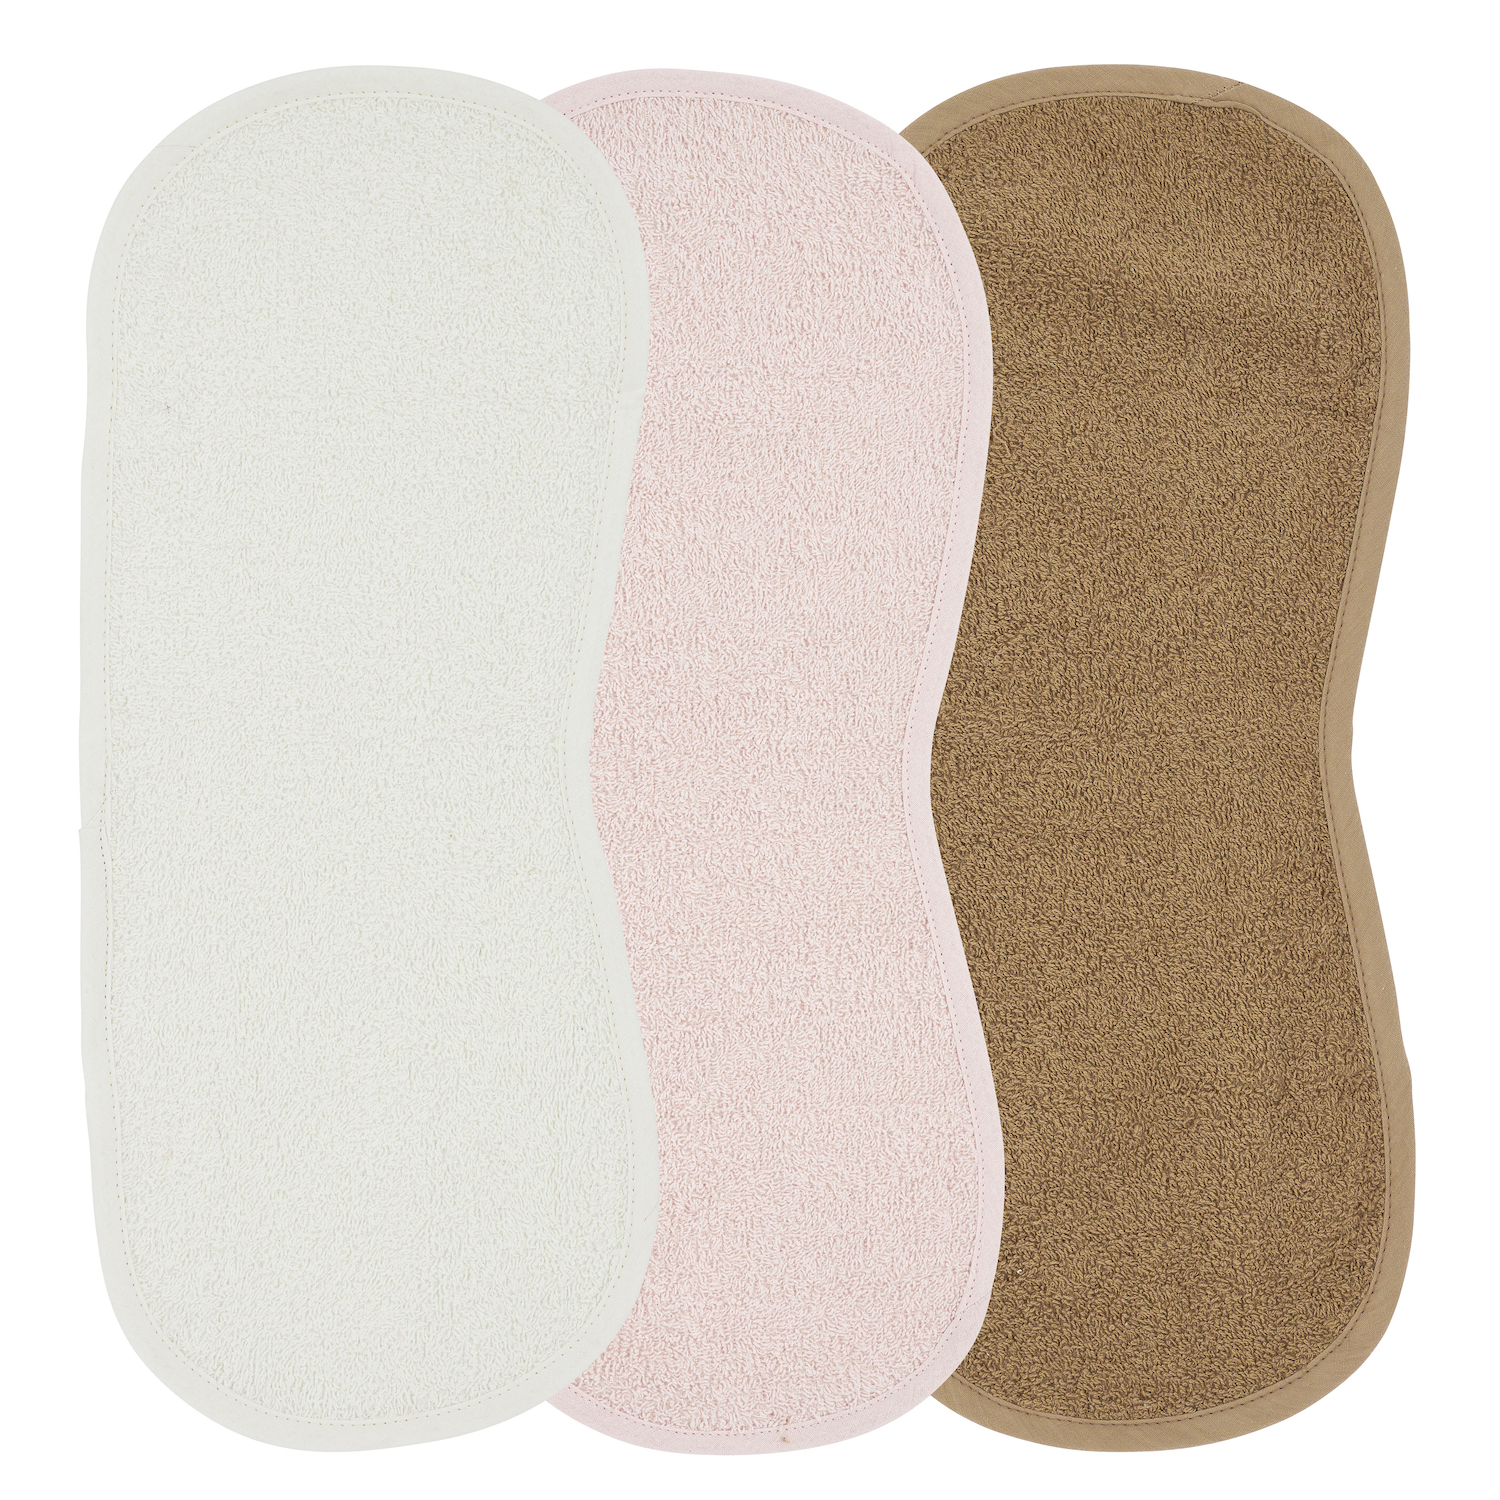 Spucktuch 3er pack frottee Uni - offwhite/soft pink/toffee - 53x20cm